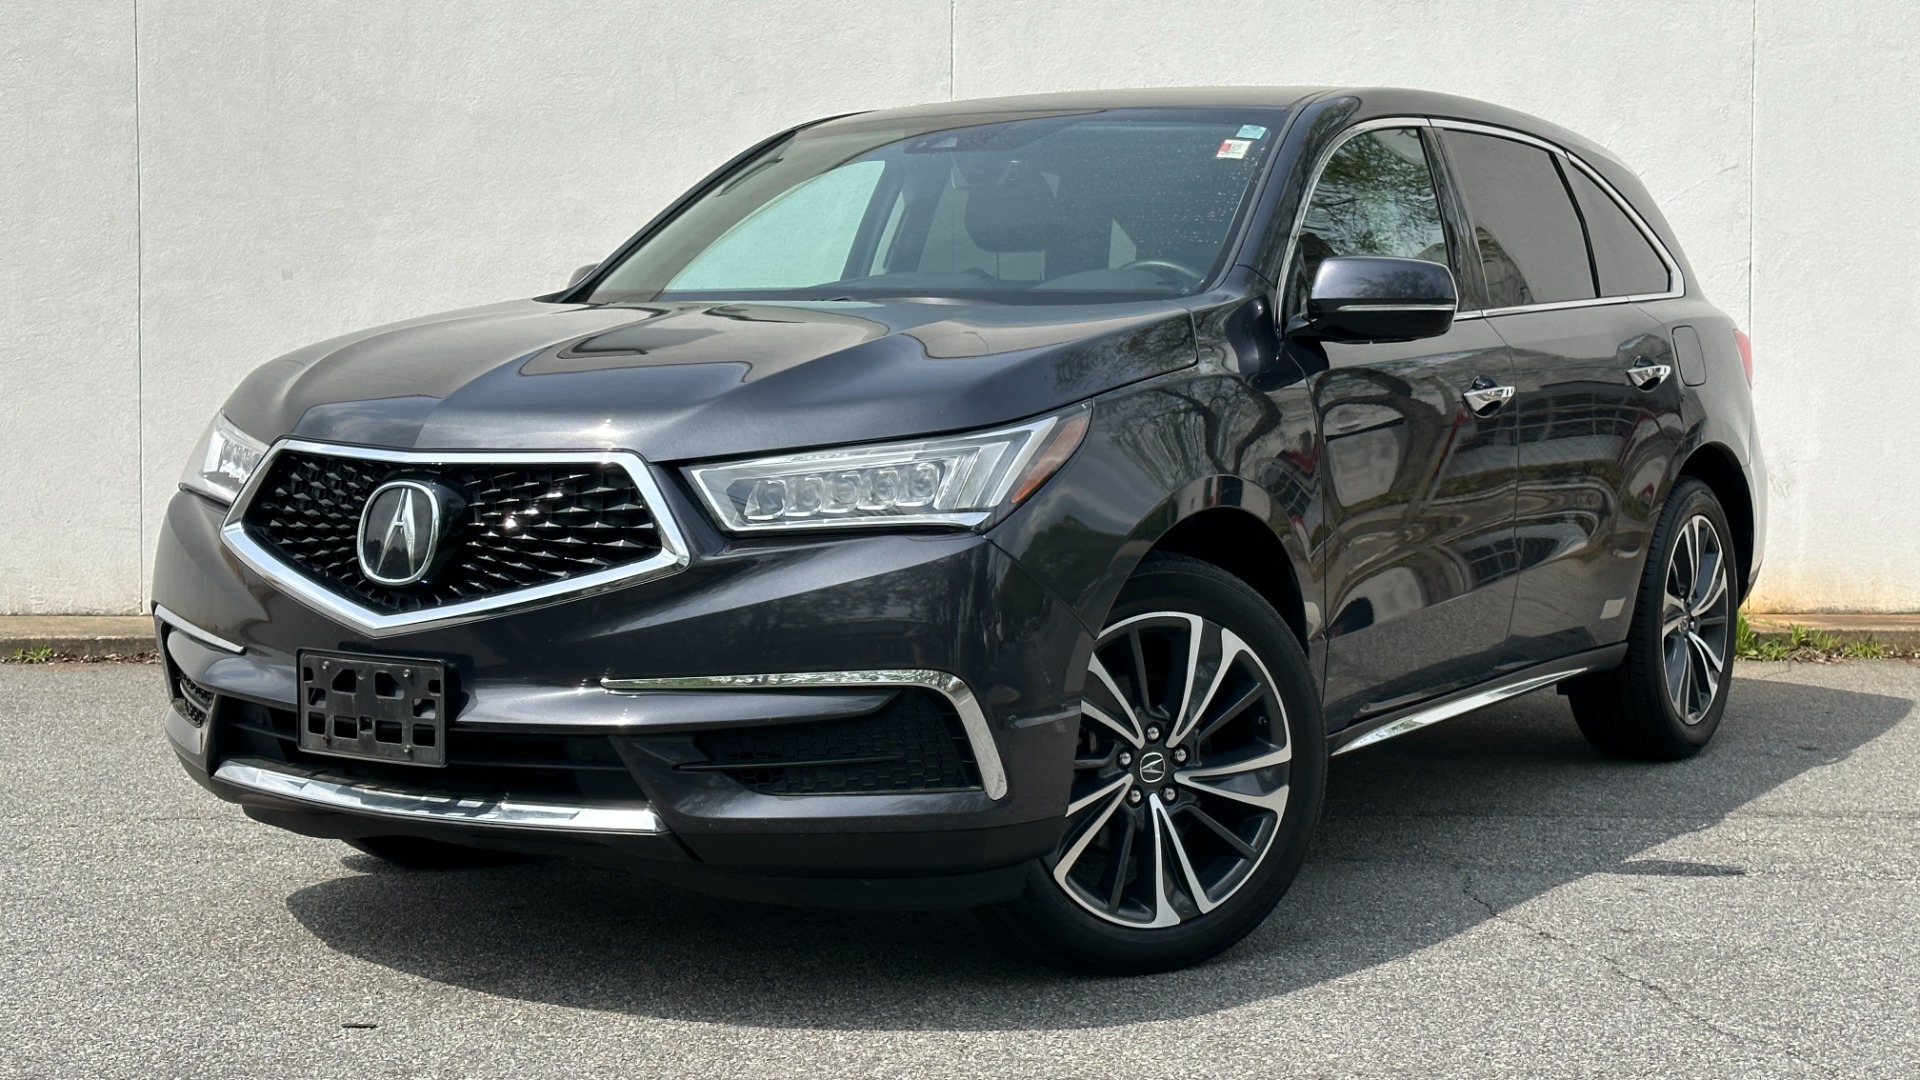 Used 2020 Acura MDX TECHNOLOGY PACKAGE / NAV / BACKUP CAM / SAFETY ASSIST / 3RD ROW / SUNROOF for sale $36,495 at Formula Imports in Charlotte NC 28227 1